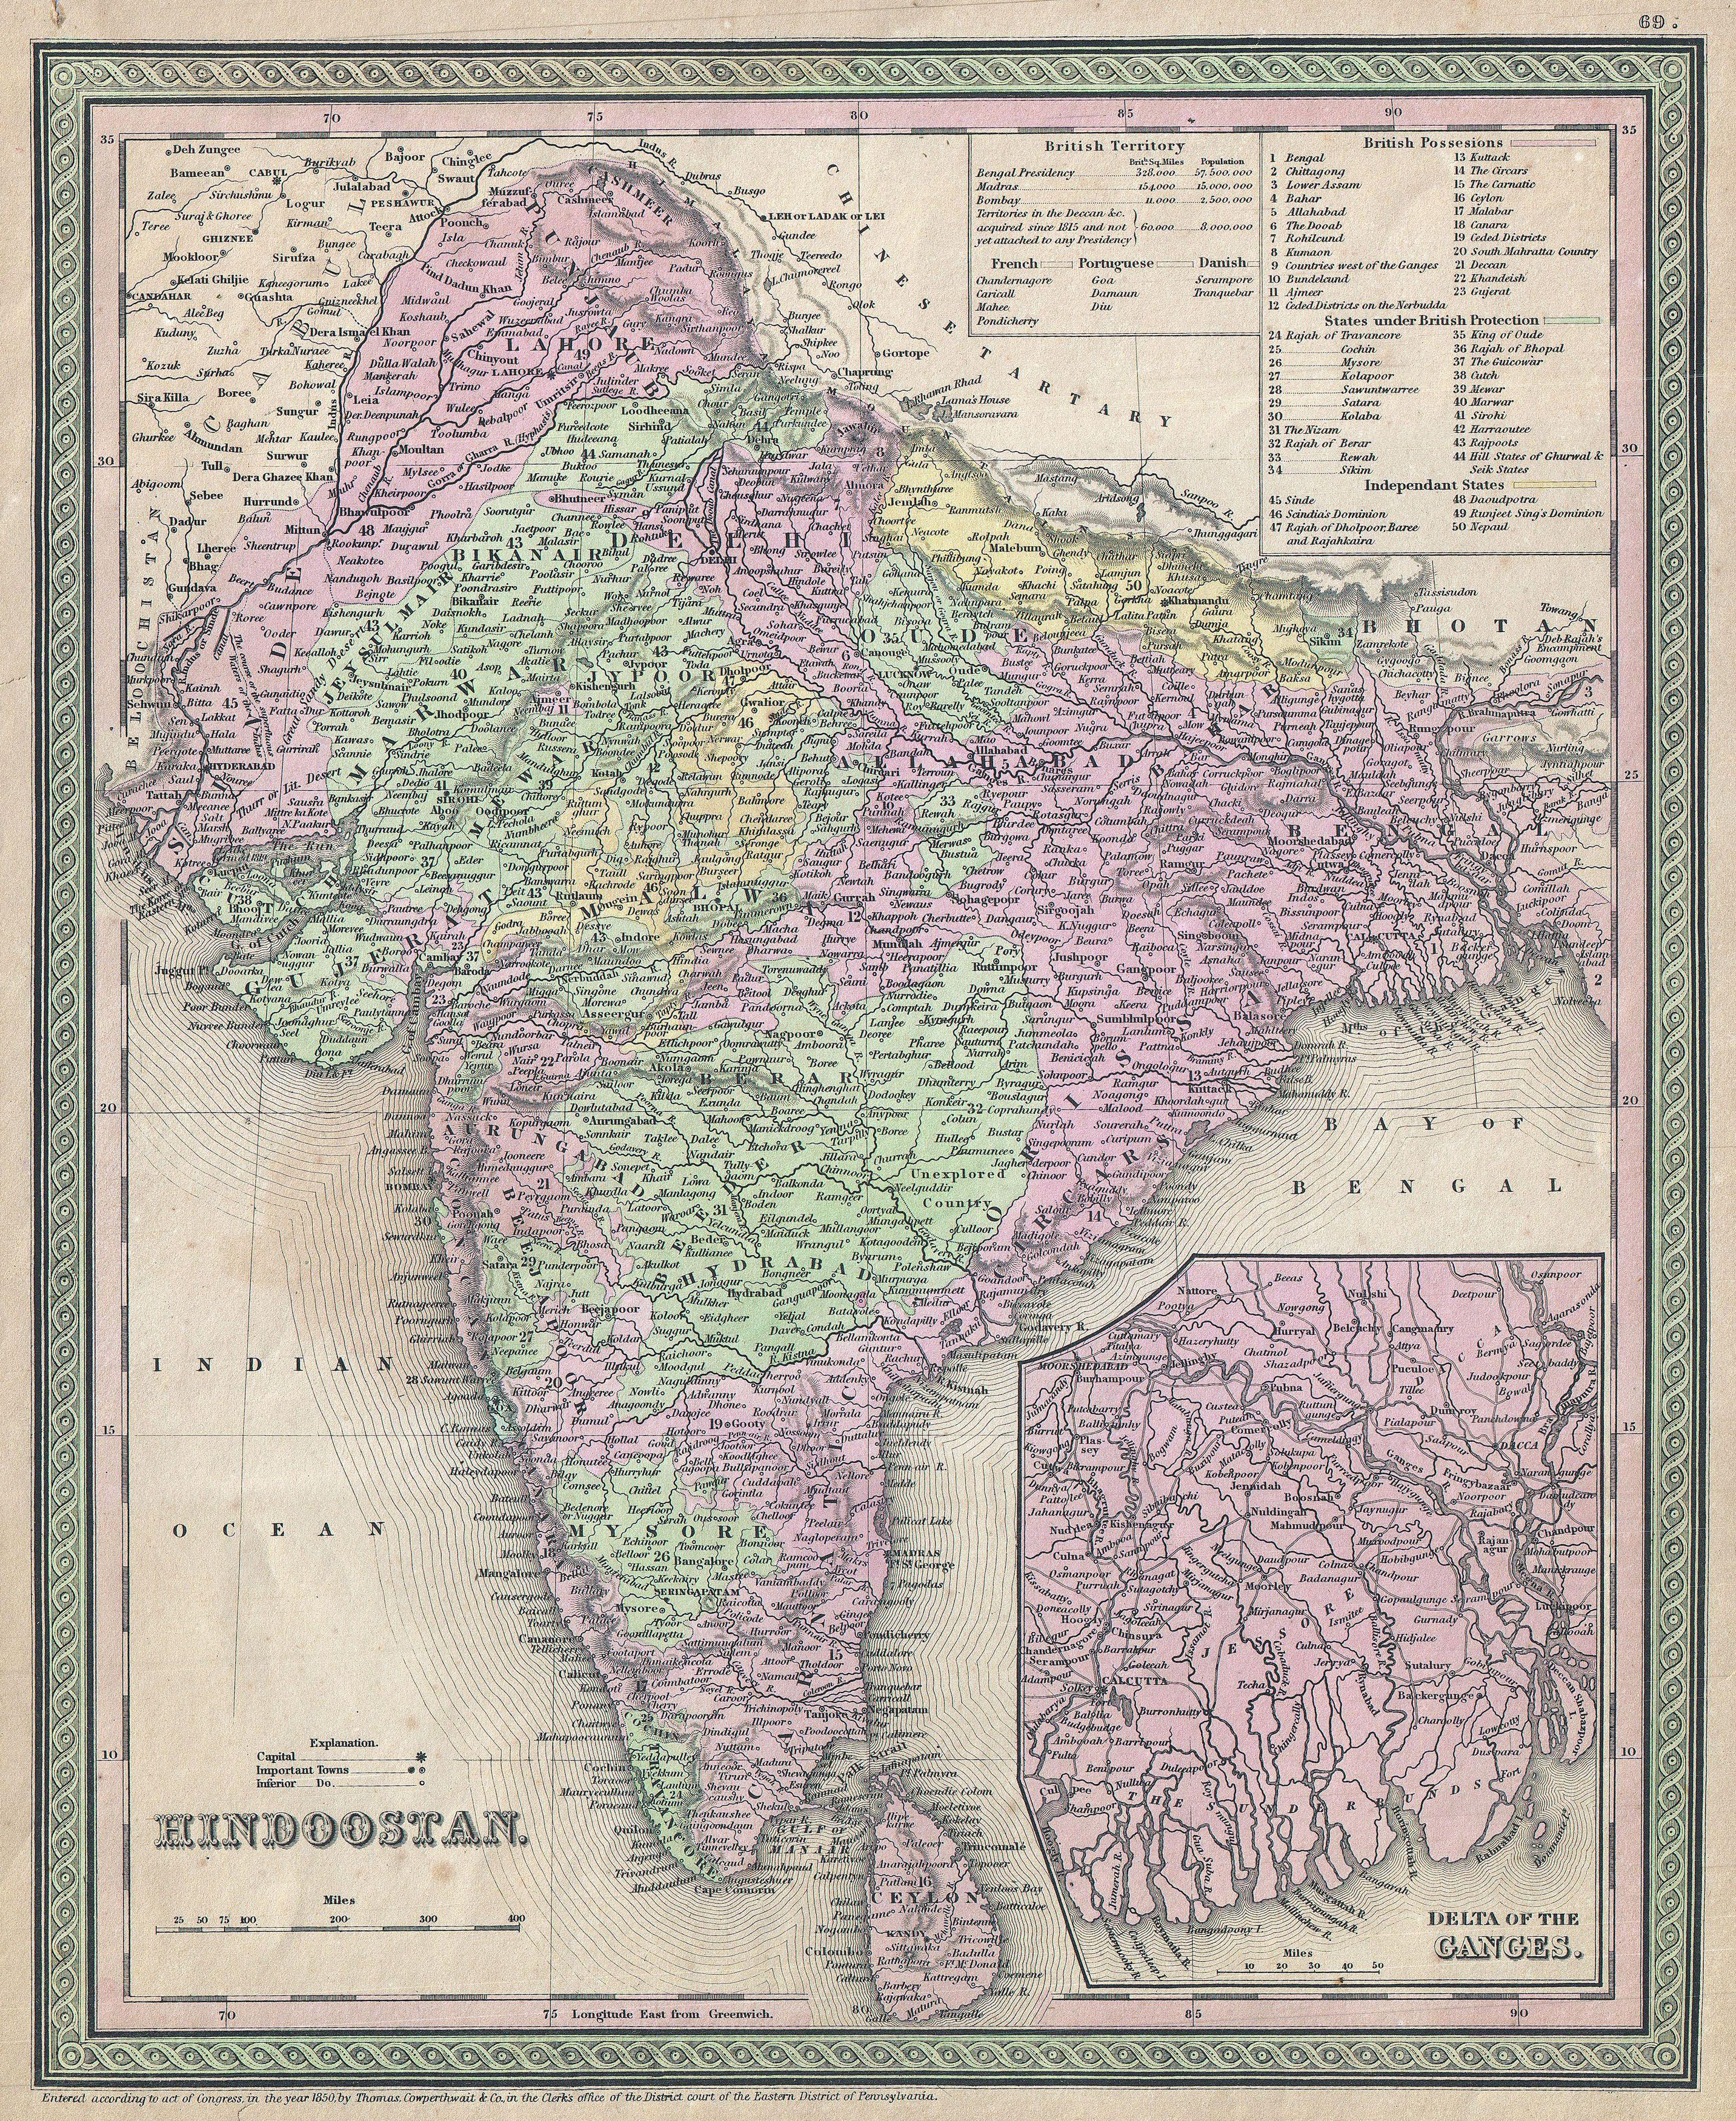 1853 Mitchell Map of India - Geographicus - Hindoostan-mitchell-1850